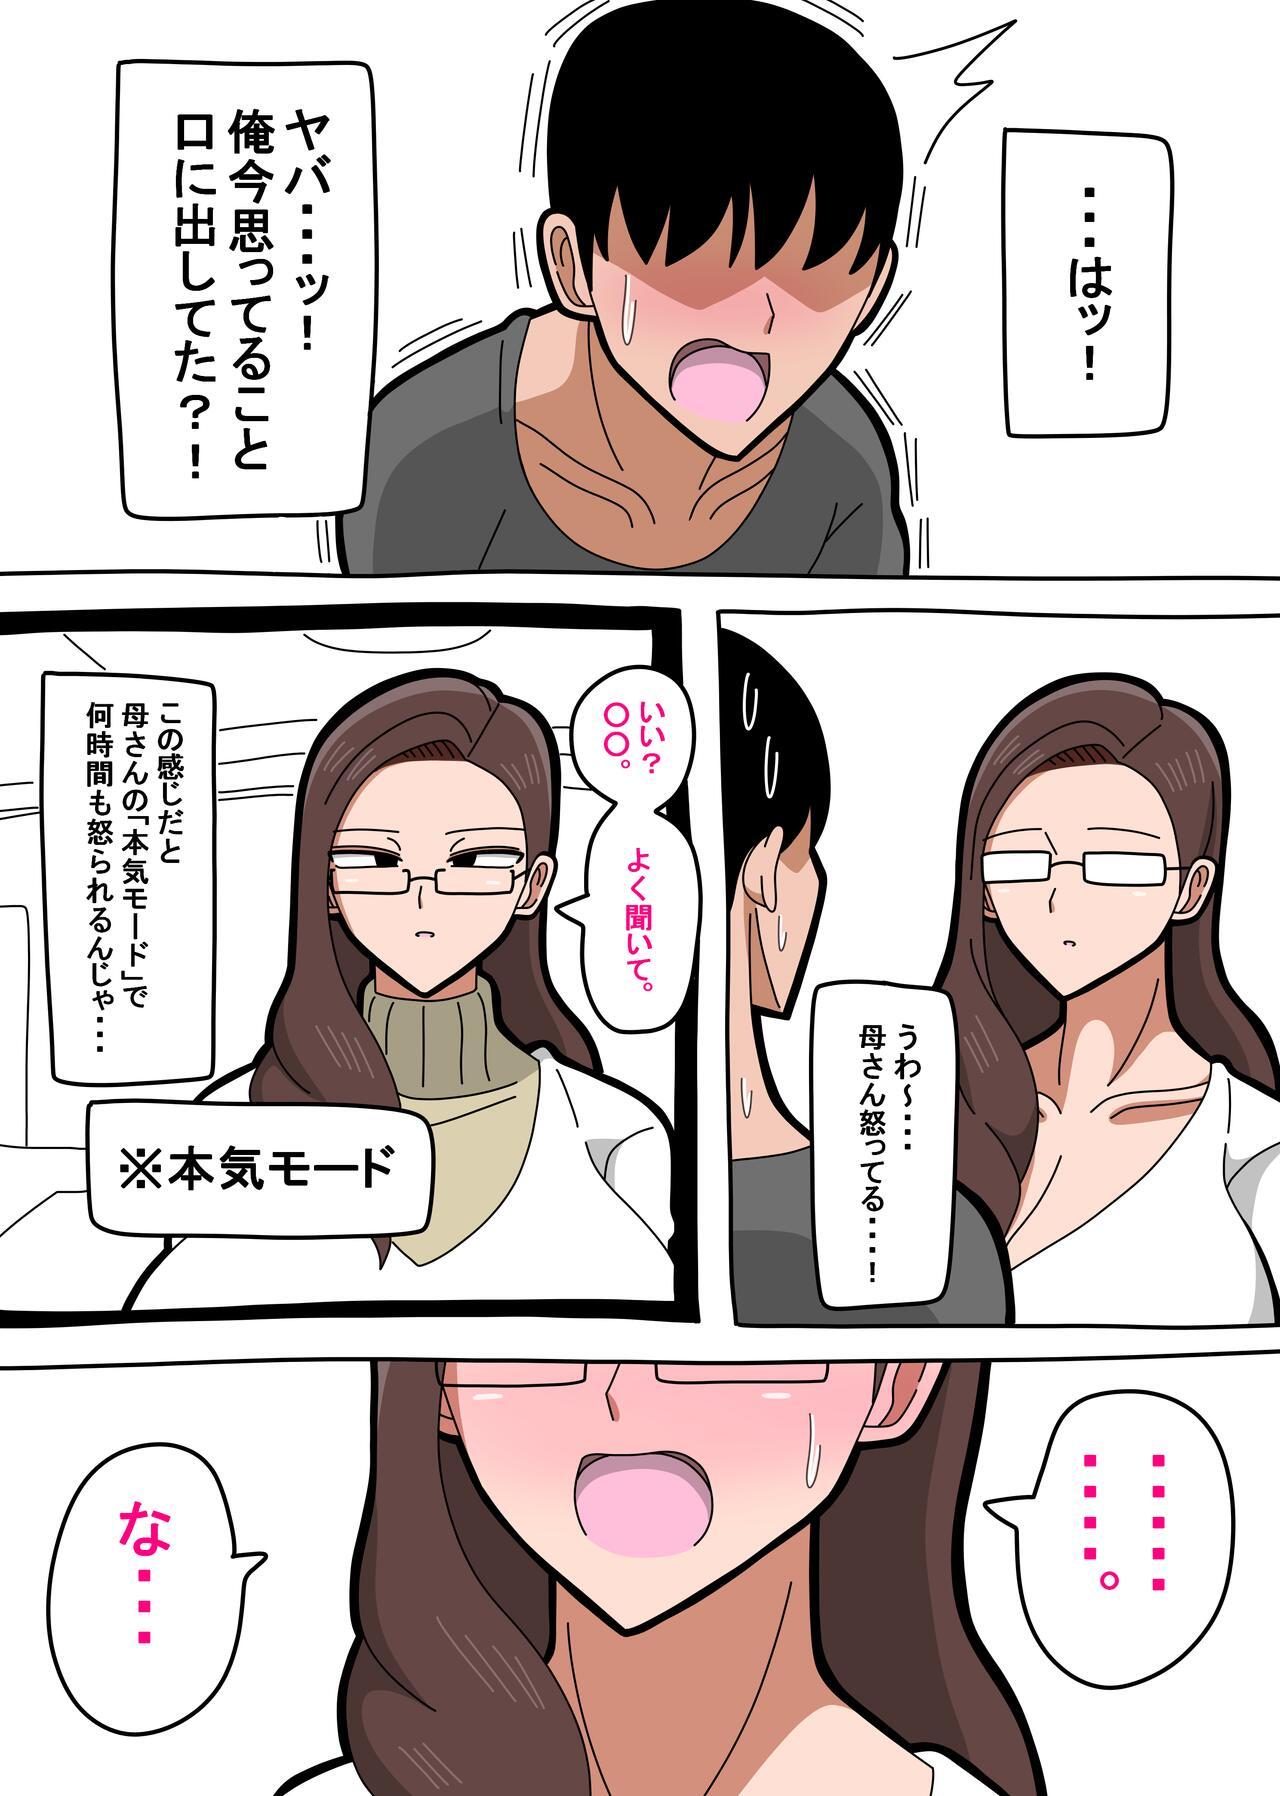 Foot 母さんは女社長 - Original Young - Page 5